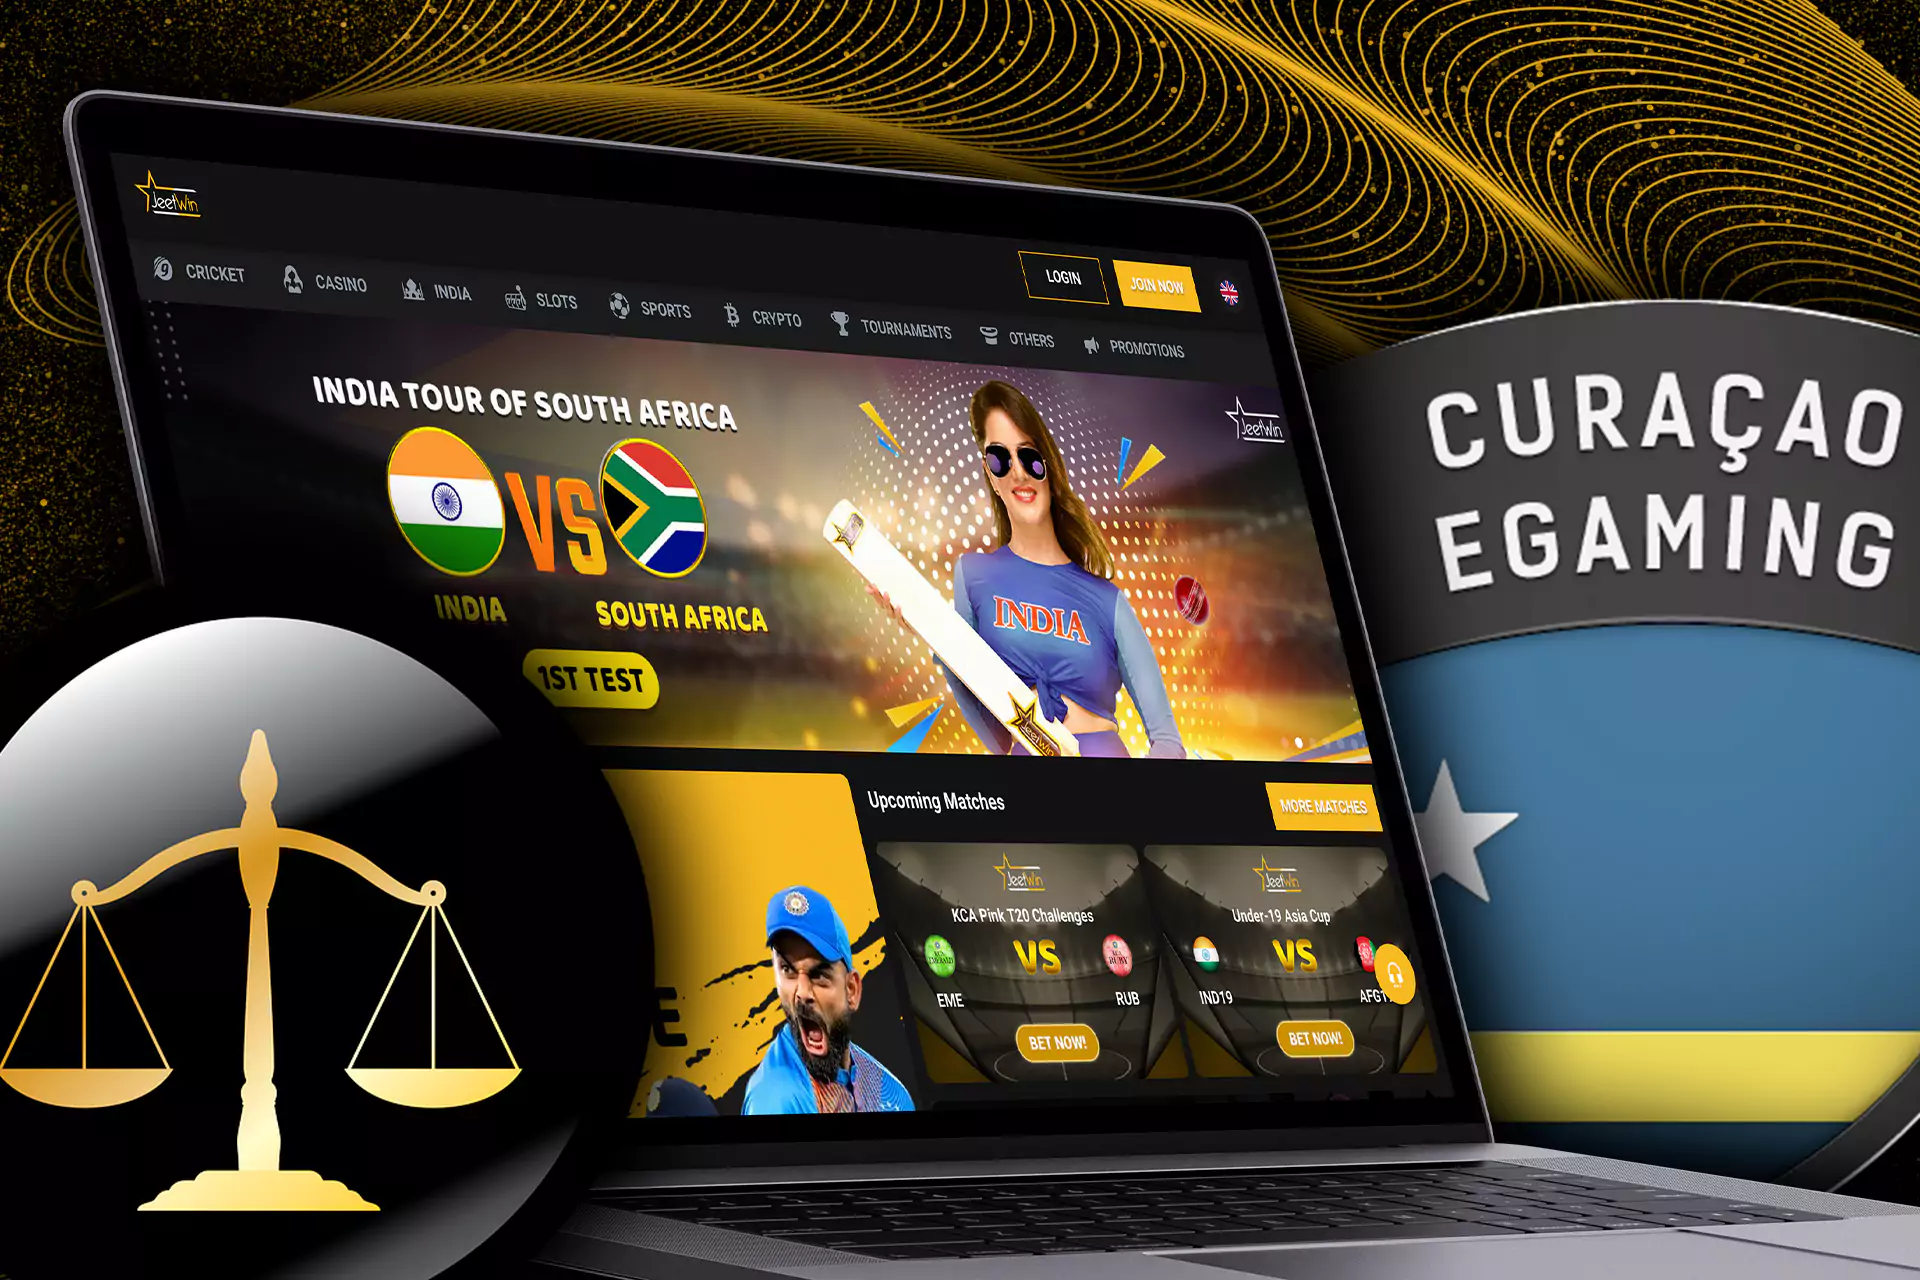 The Jeetwin Casino works legally in India thanking the Curacao Gaming license.